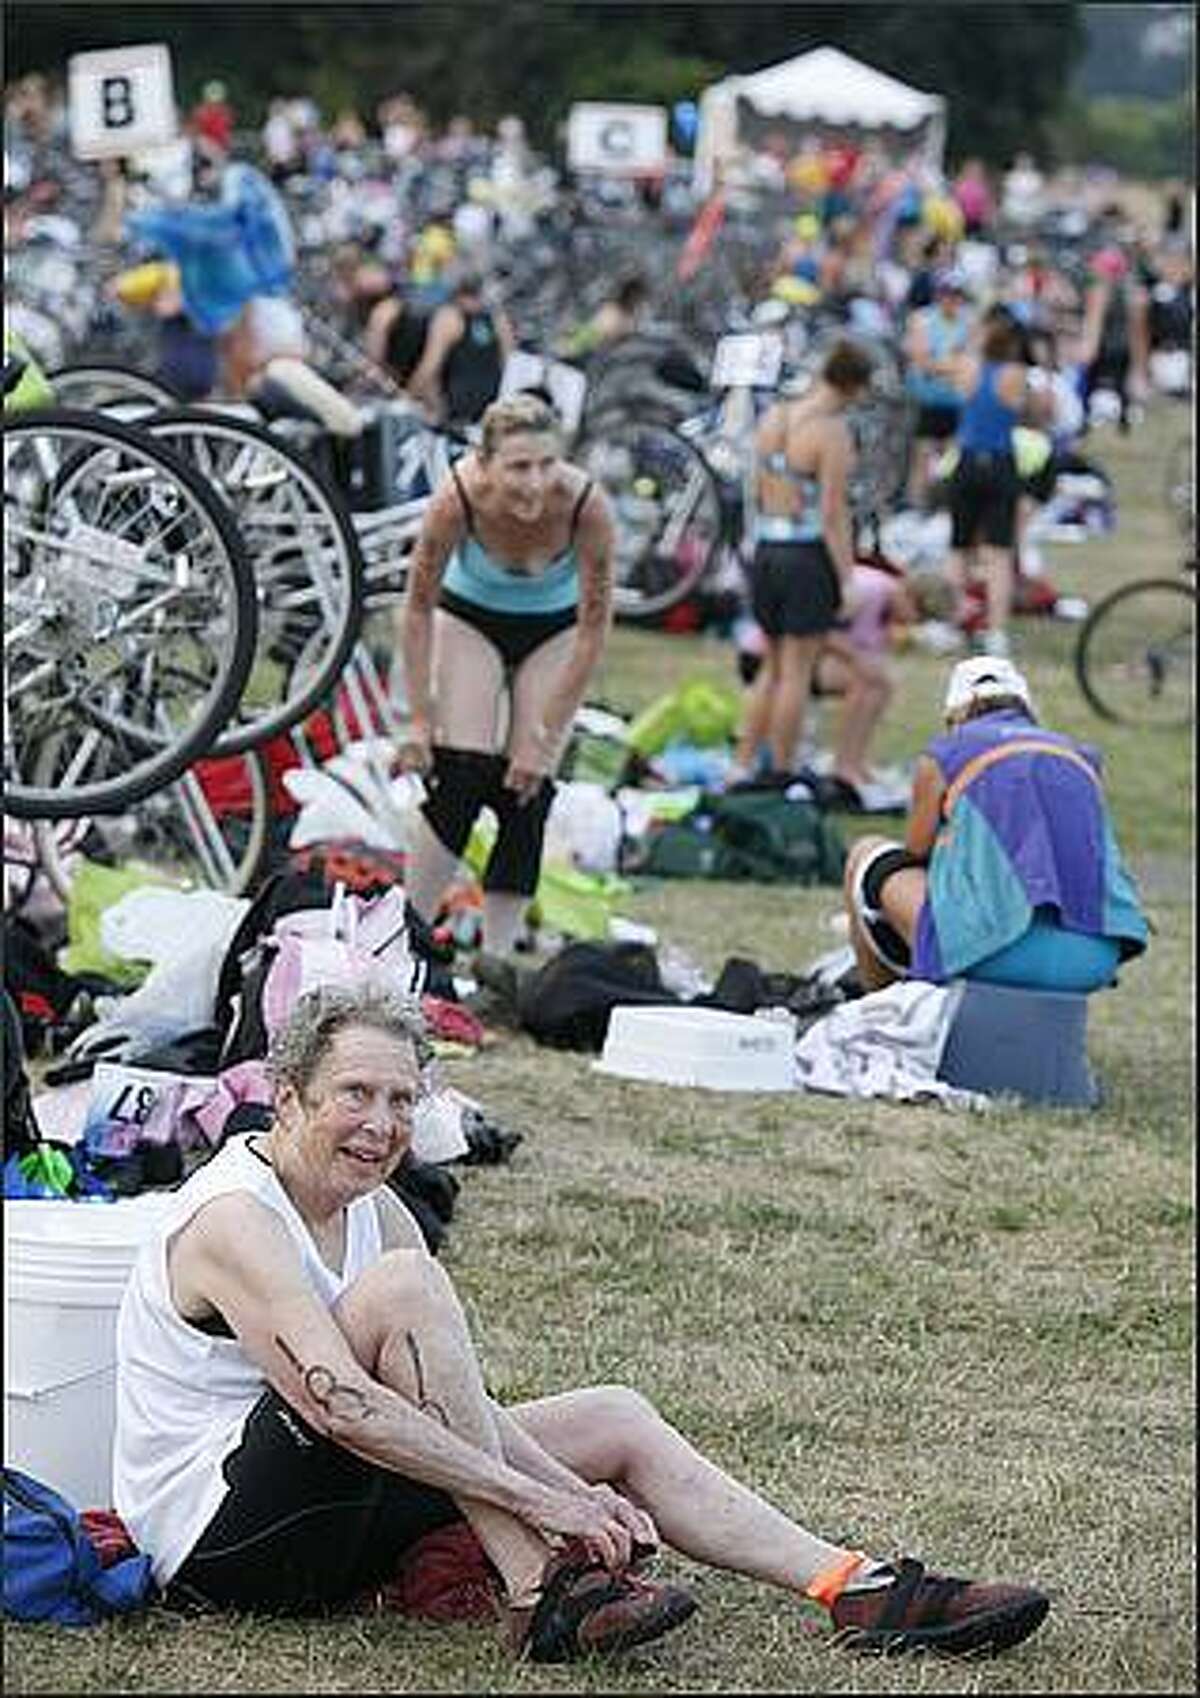 Athletes make the transition from swimming to biking in the 2008 Danskin Triathlon.